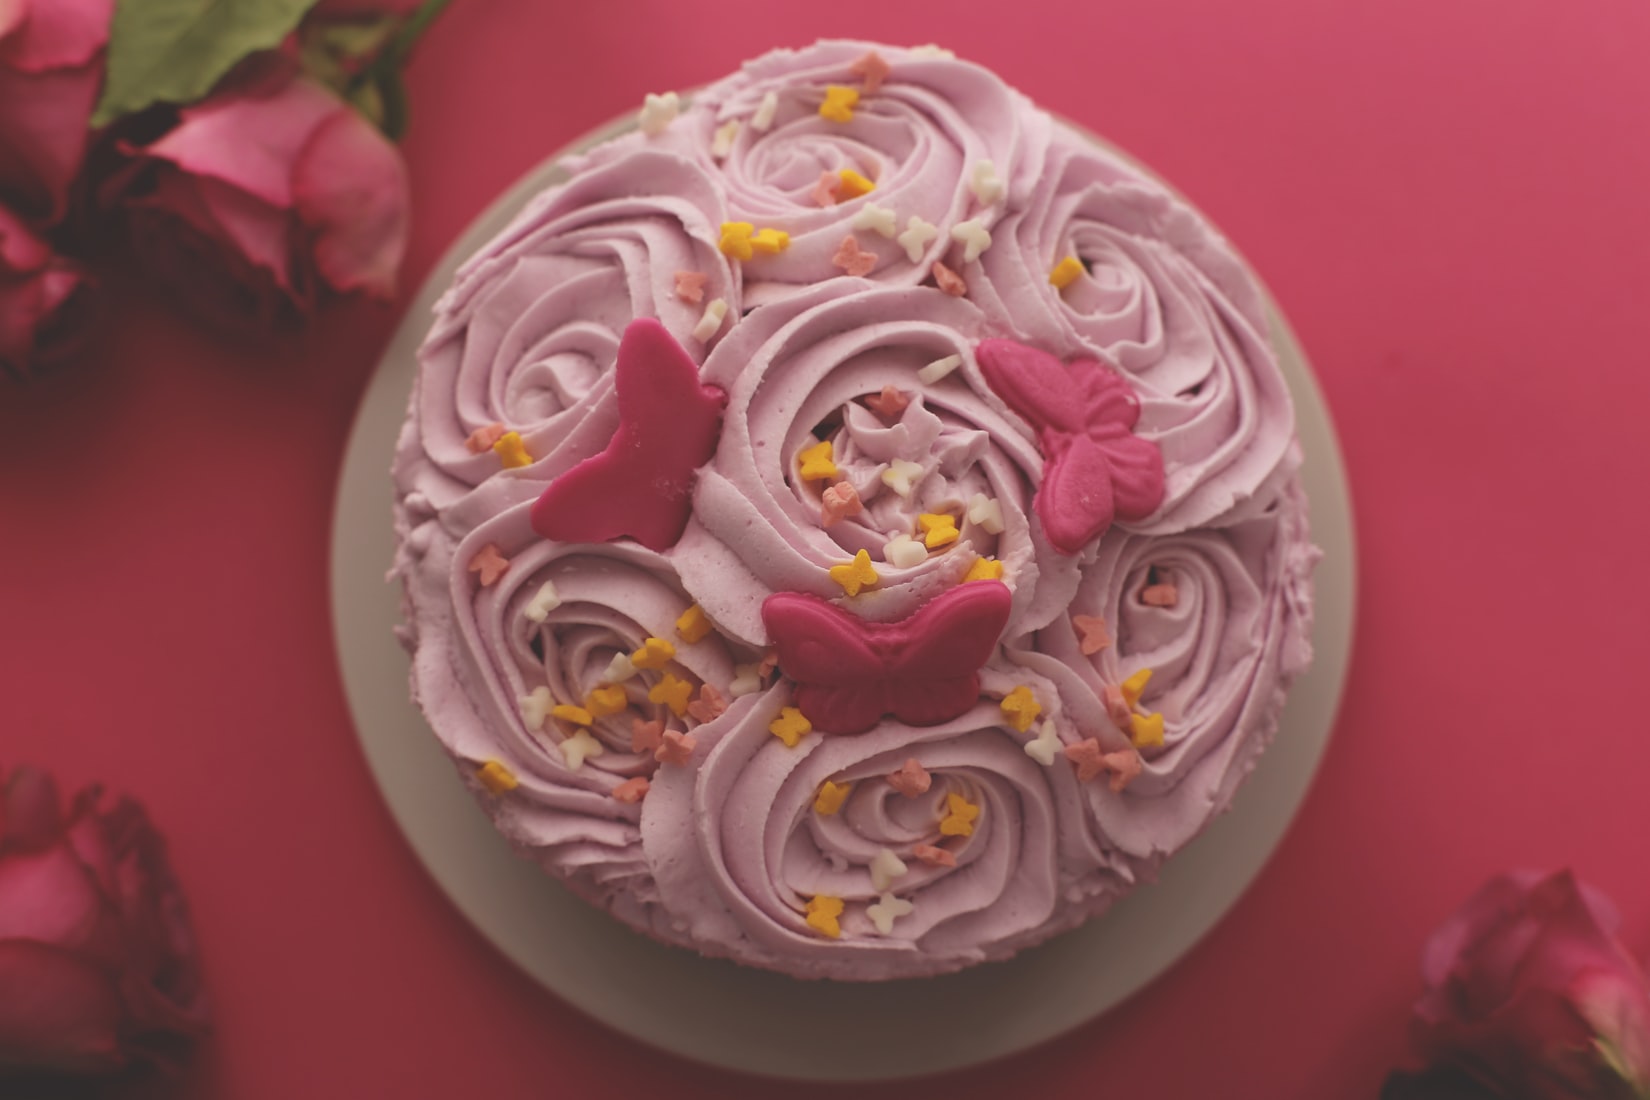 Cake covered in pink frosting and butterflies. Image: Alexandra Tincu
